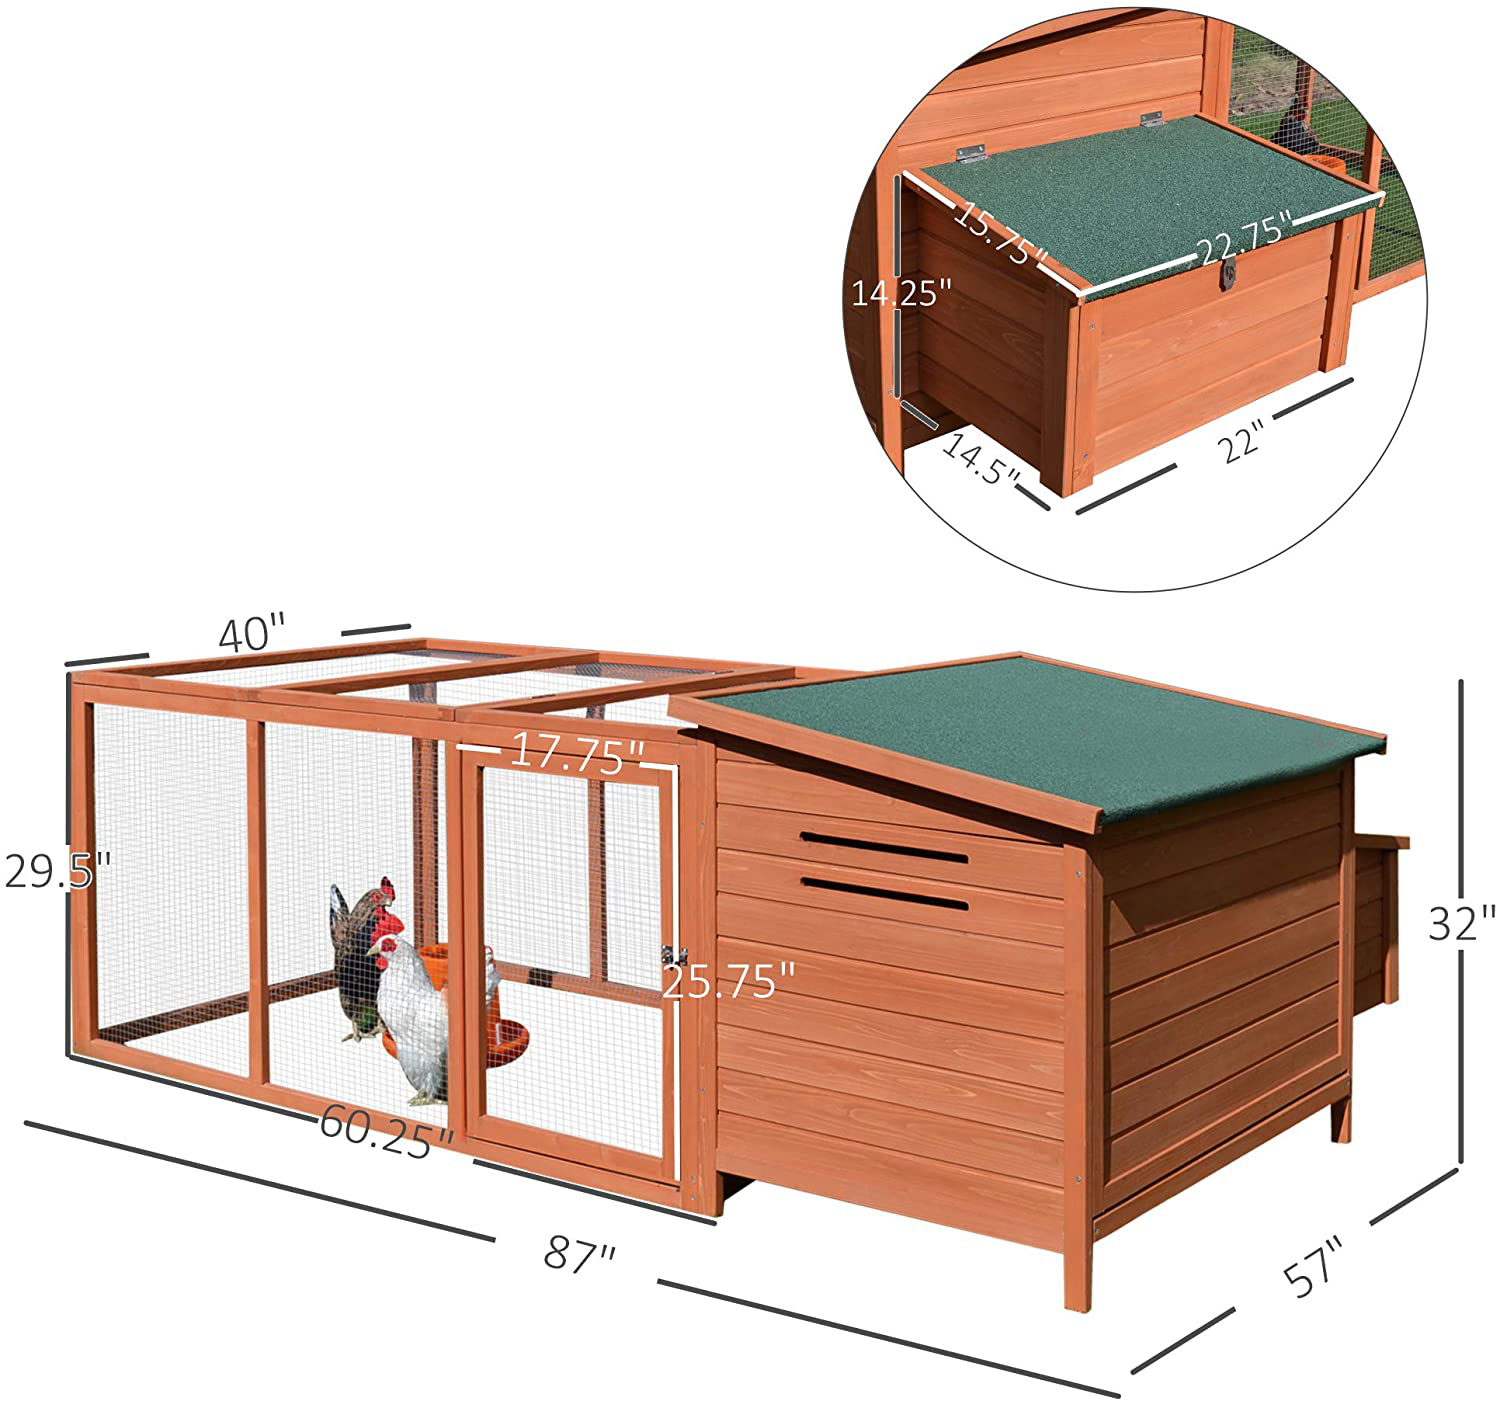 Pawhut 87" Deluxe Chicken Coop Wooden Hen House Rabbit Hutch Poultry Cage Pen Backyard with Large Outdoor Run, Indoor Nesting Box, & Fir Wood Build